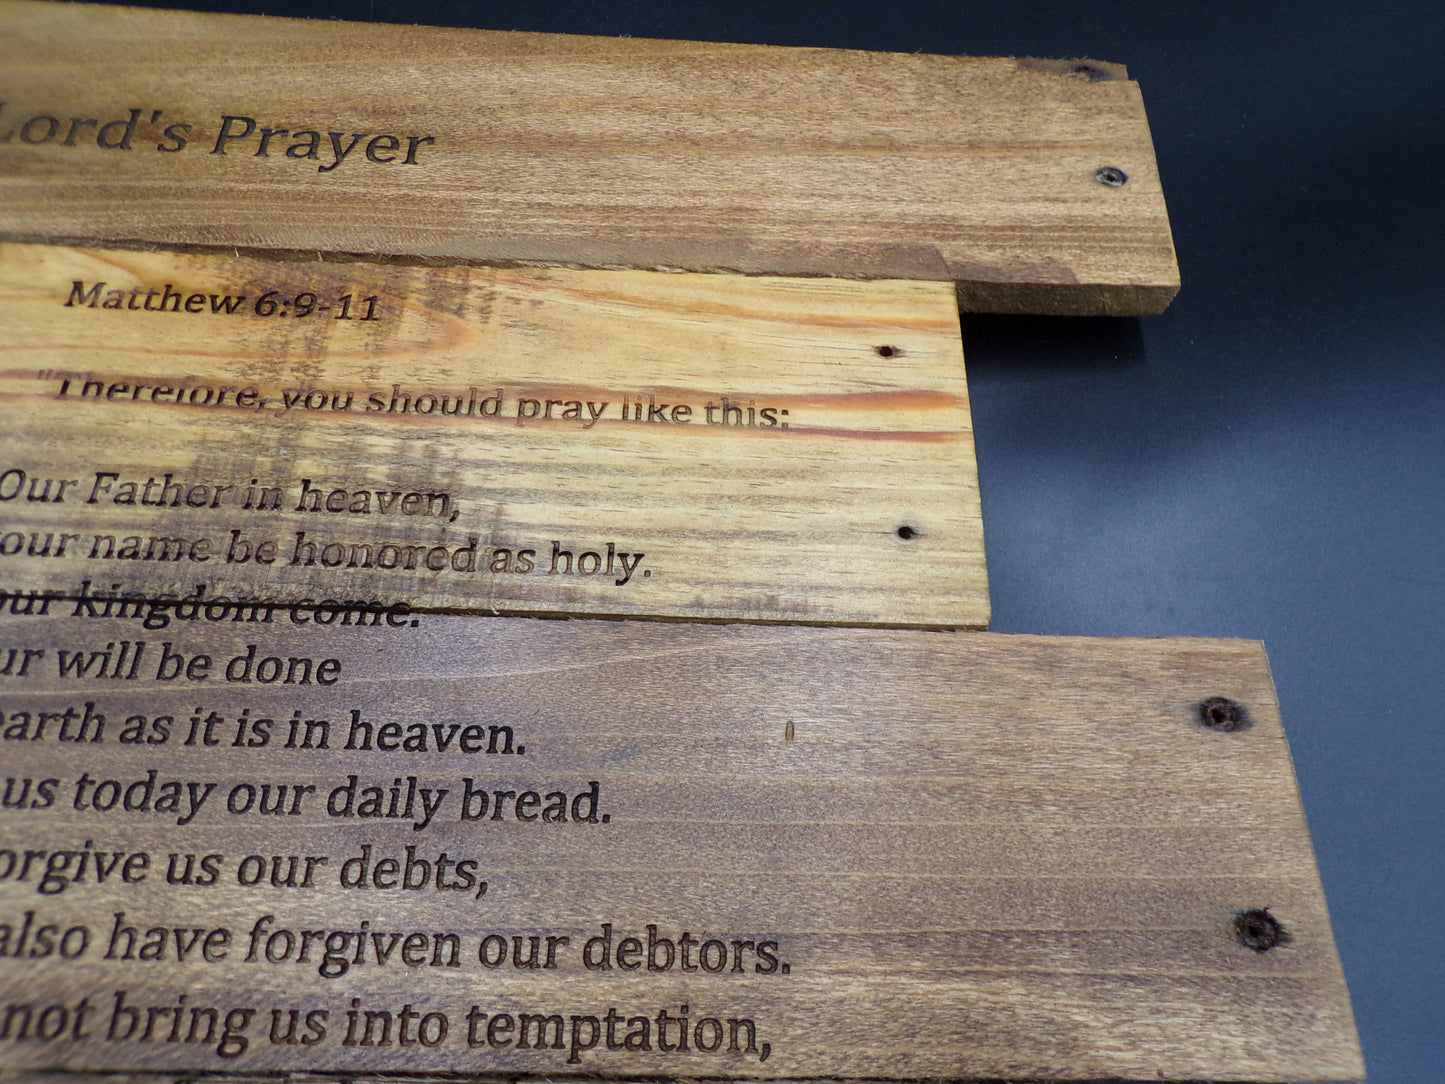 Praying Hands Reclaimed Pallet Wood 'Lord's Prayer